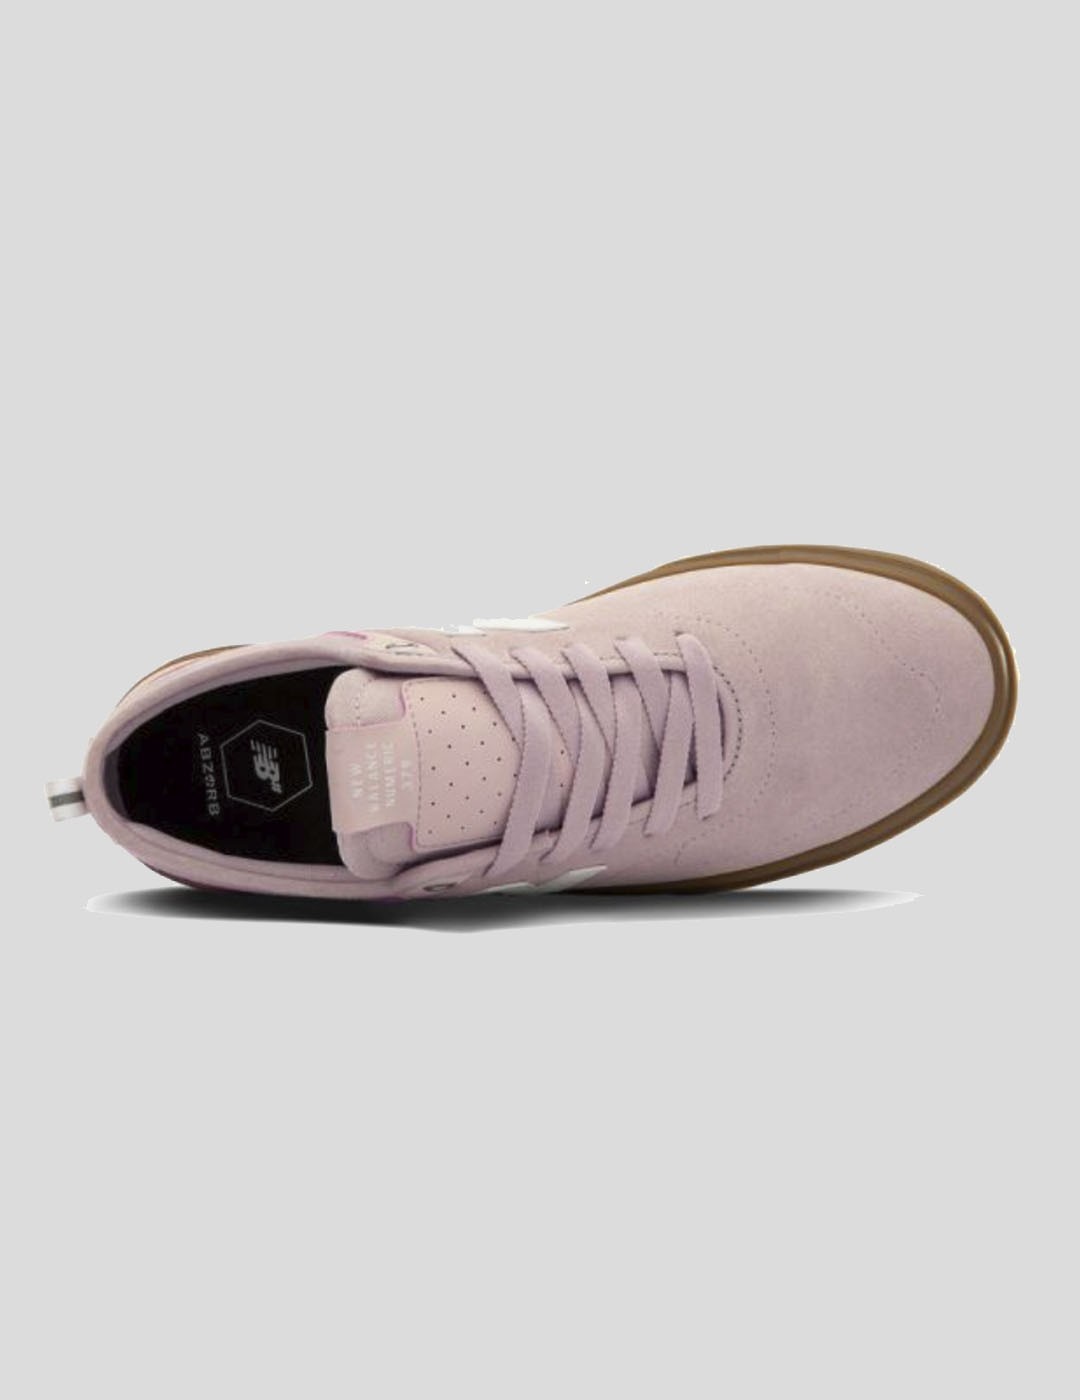 ZAPATILLAS NEW BALANCE NUMERIC 379 PINK WITH GUM